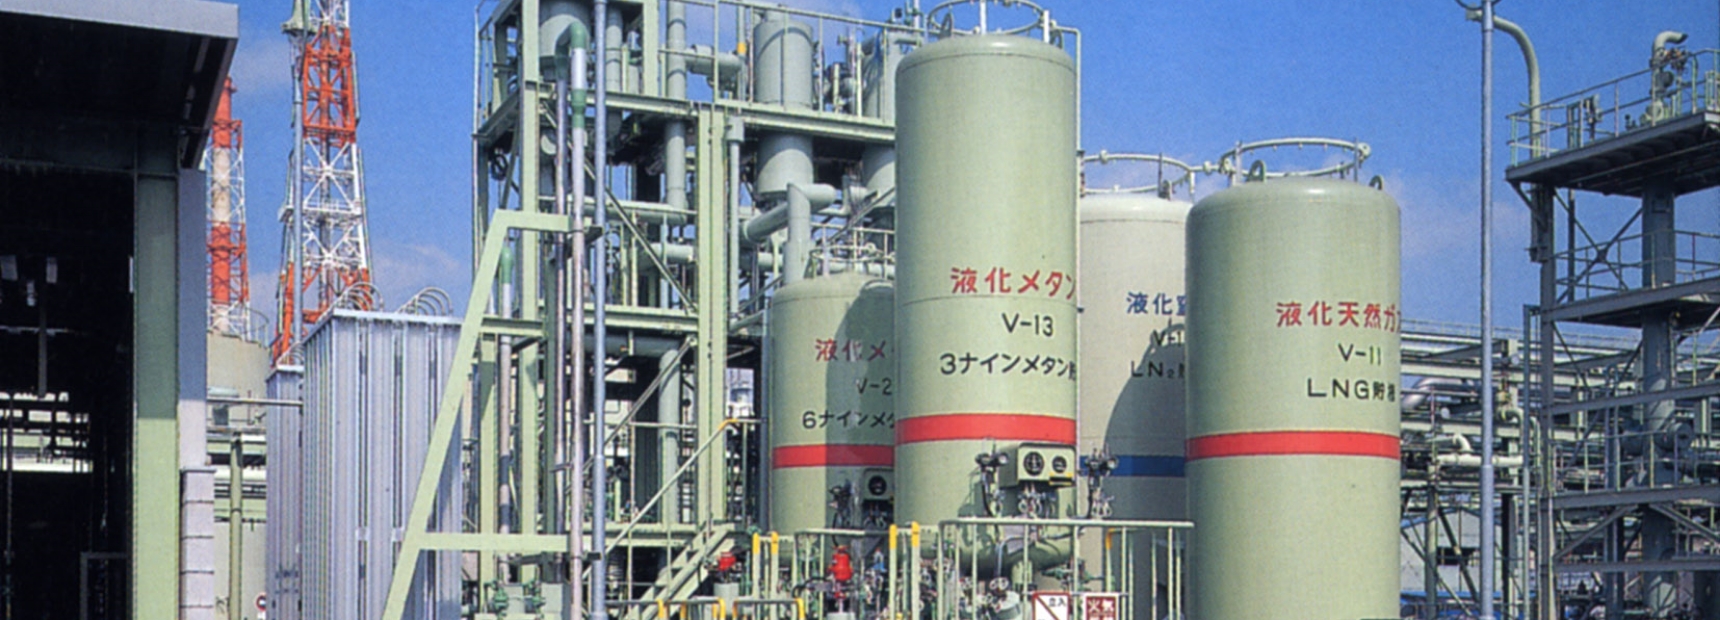 We are confident in our quality. For high-purity methane gas, contact Osaka Gas Liquid!